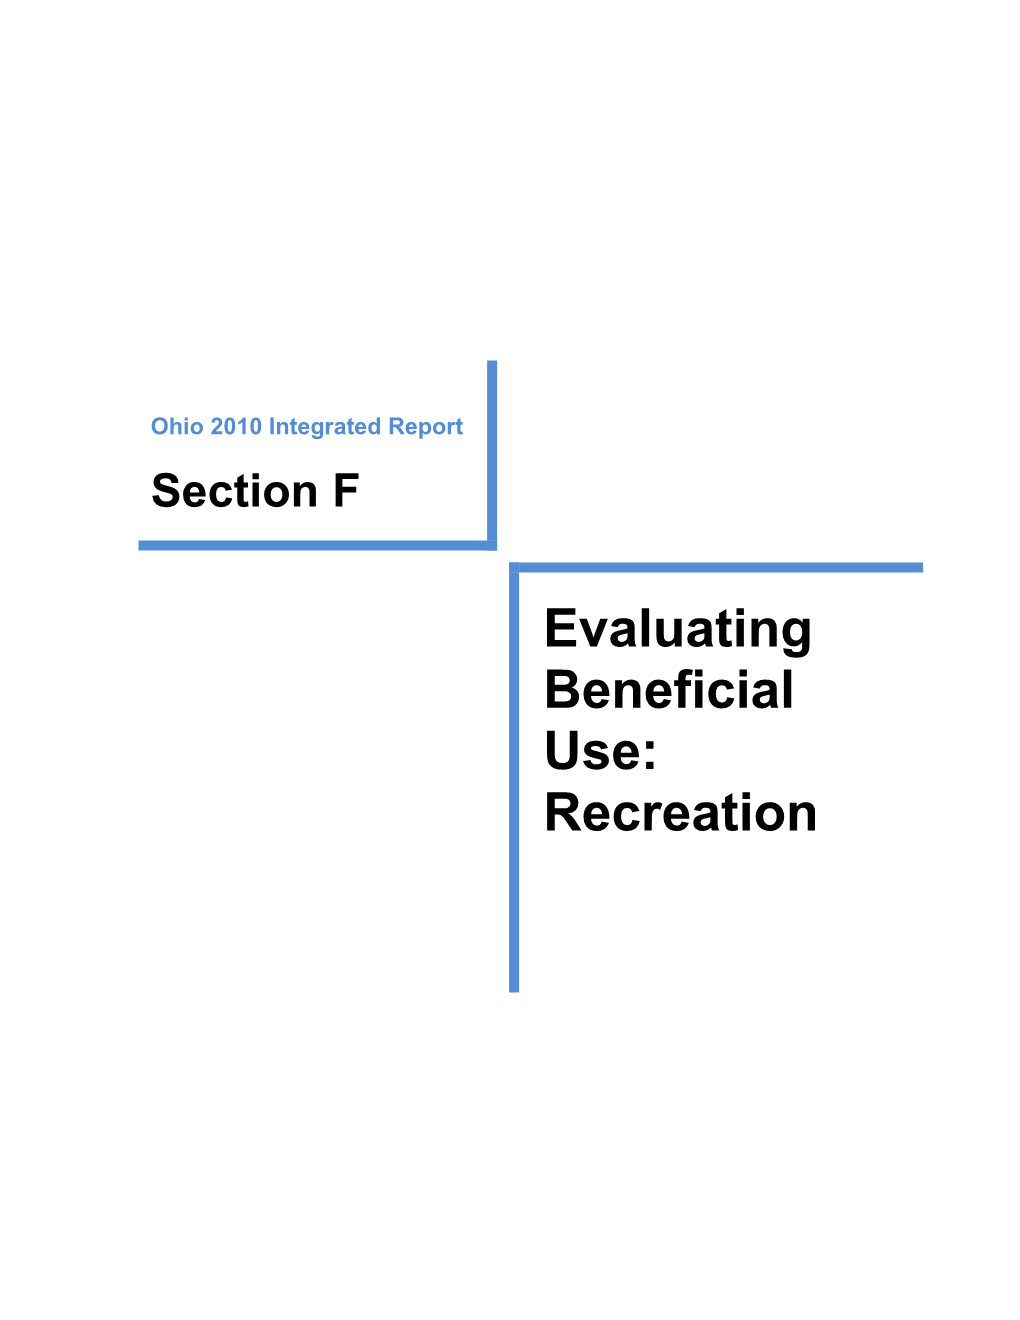 Evaluating Beneficial Use: Recreation